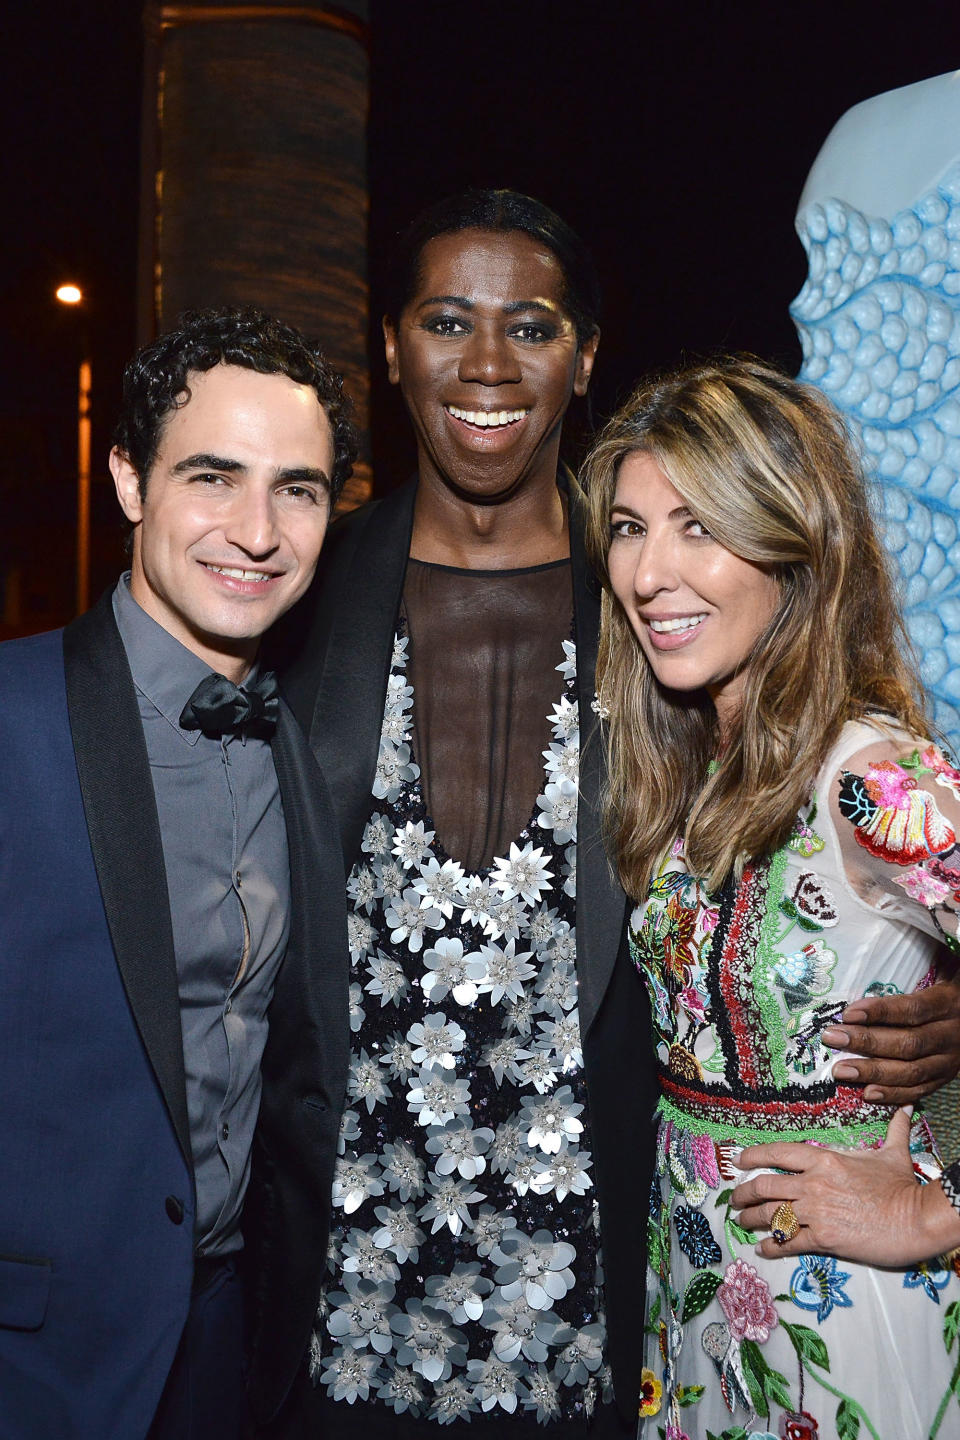 Zac Posen, J. Alexander and Nina Garcia attend HBO's Post Emmy Awards Reception at The Plaza at the Pacific Design Center on Sept. 18.